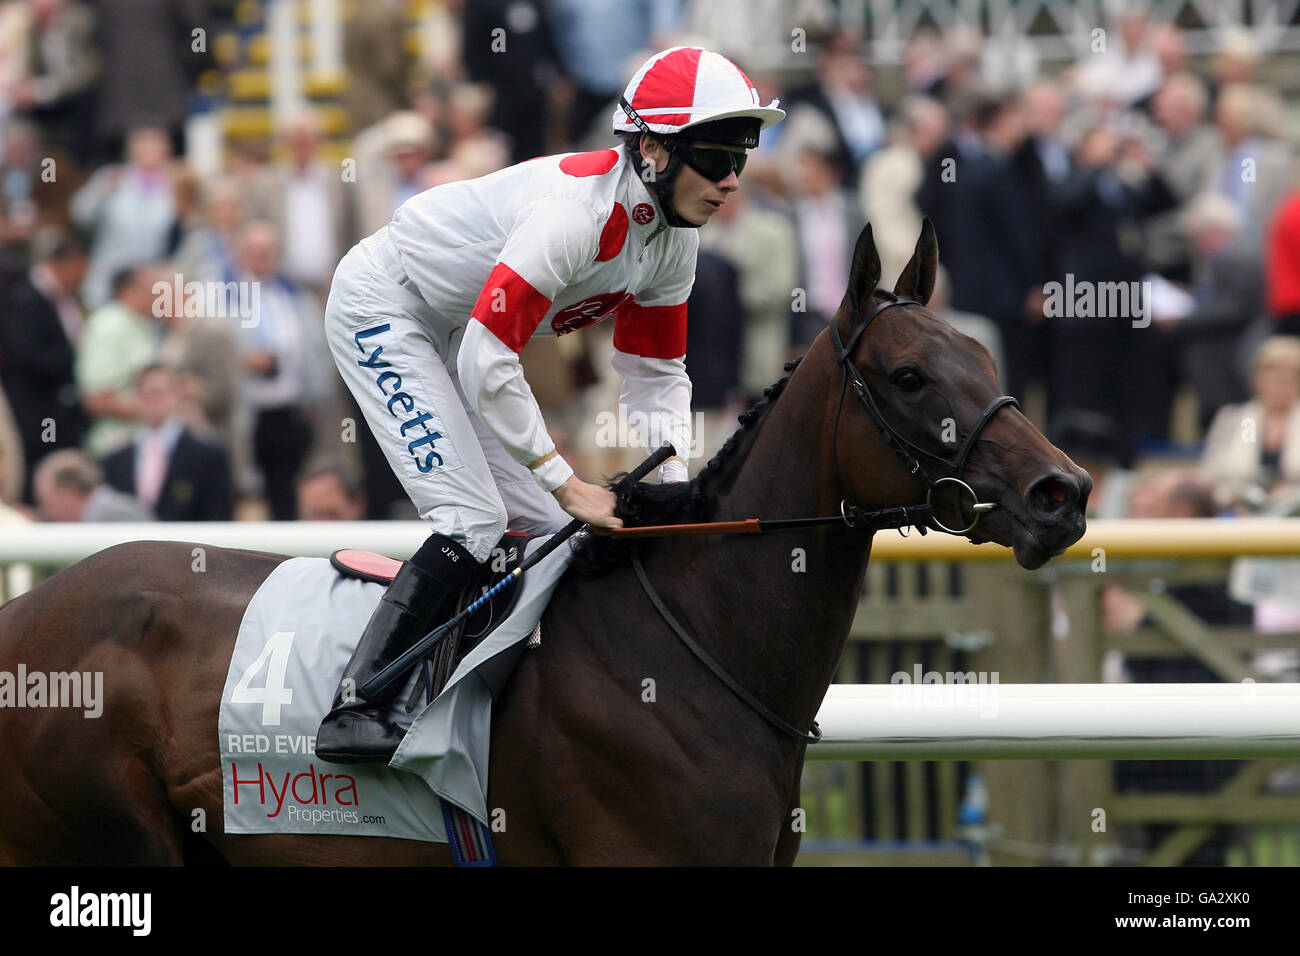 Horse Racing - Classic FM Day - Newmarket Racecourse Stock Photo